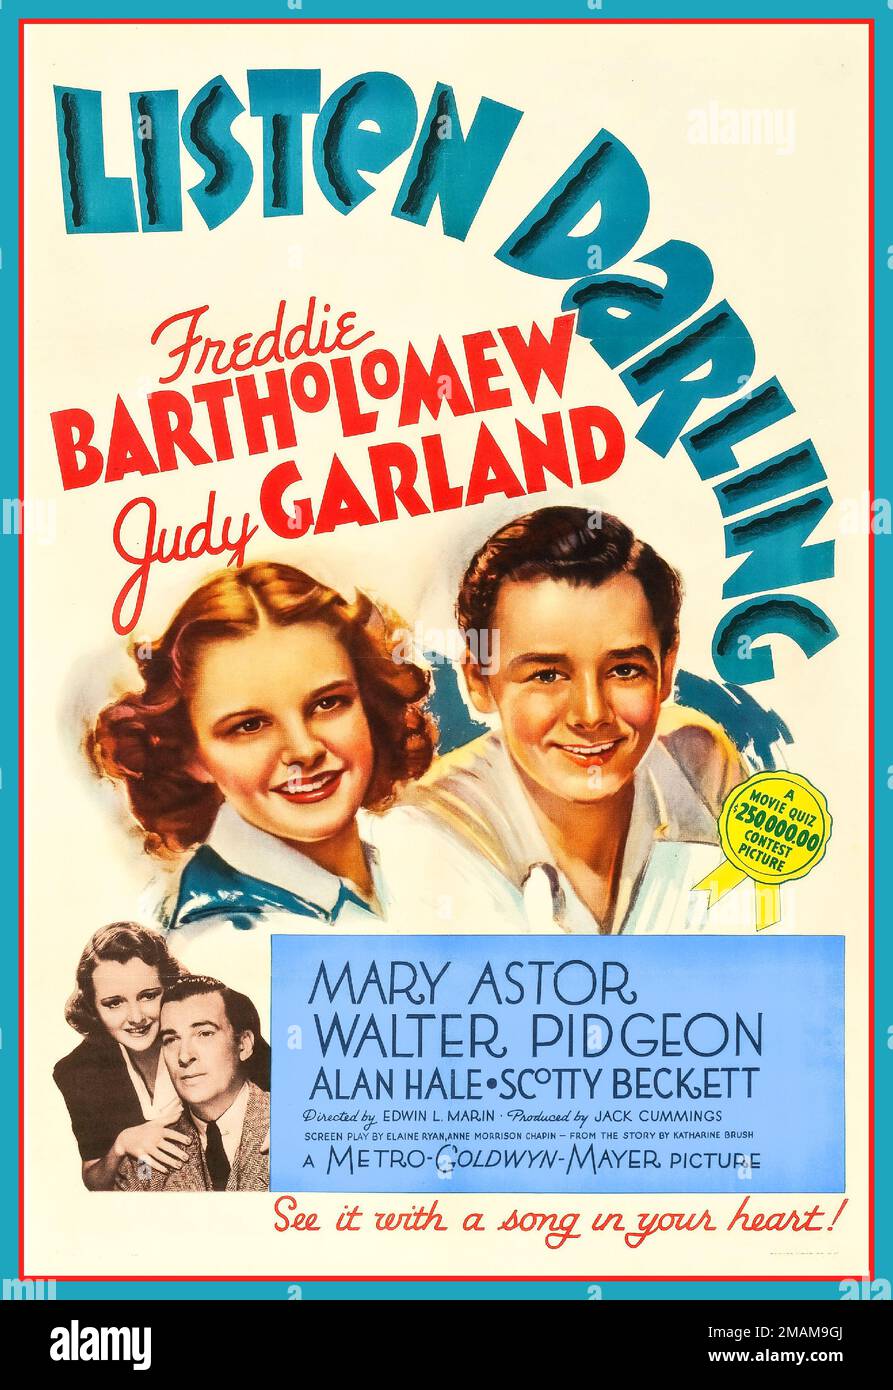 Vintage Movie Poster 1938 "Listen Darling" con Freddie Bartholomew e Judy Garland MGM Picture Hollywood USA Foto Stock